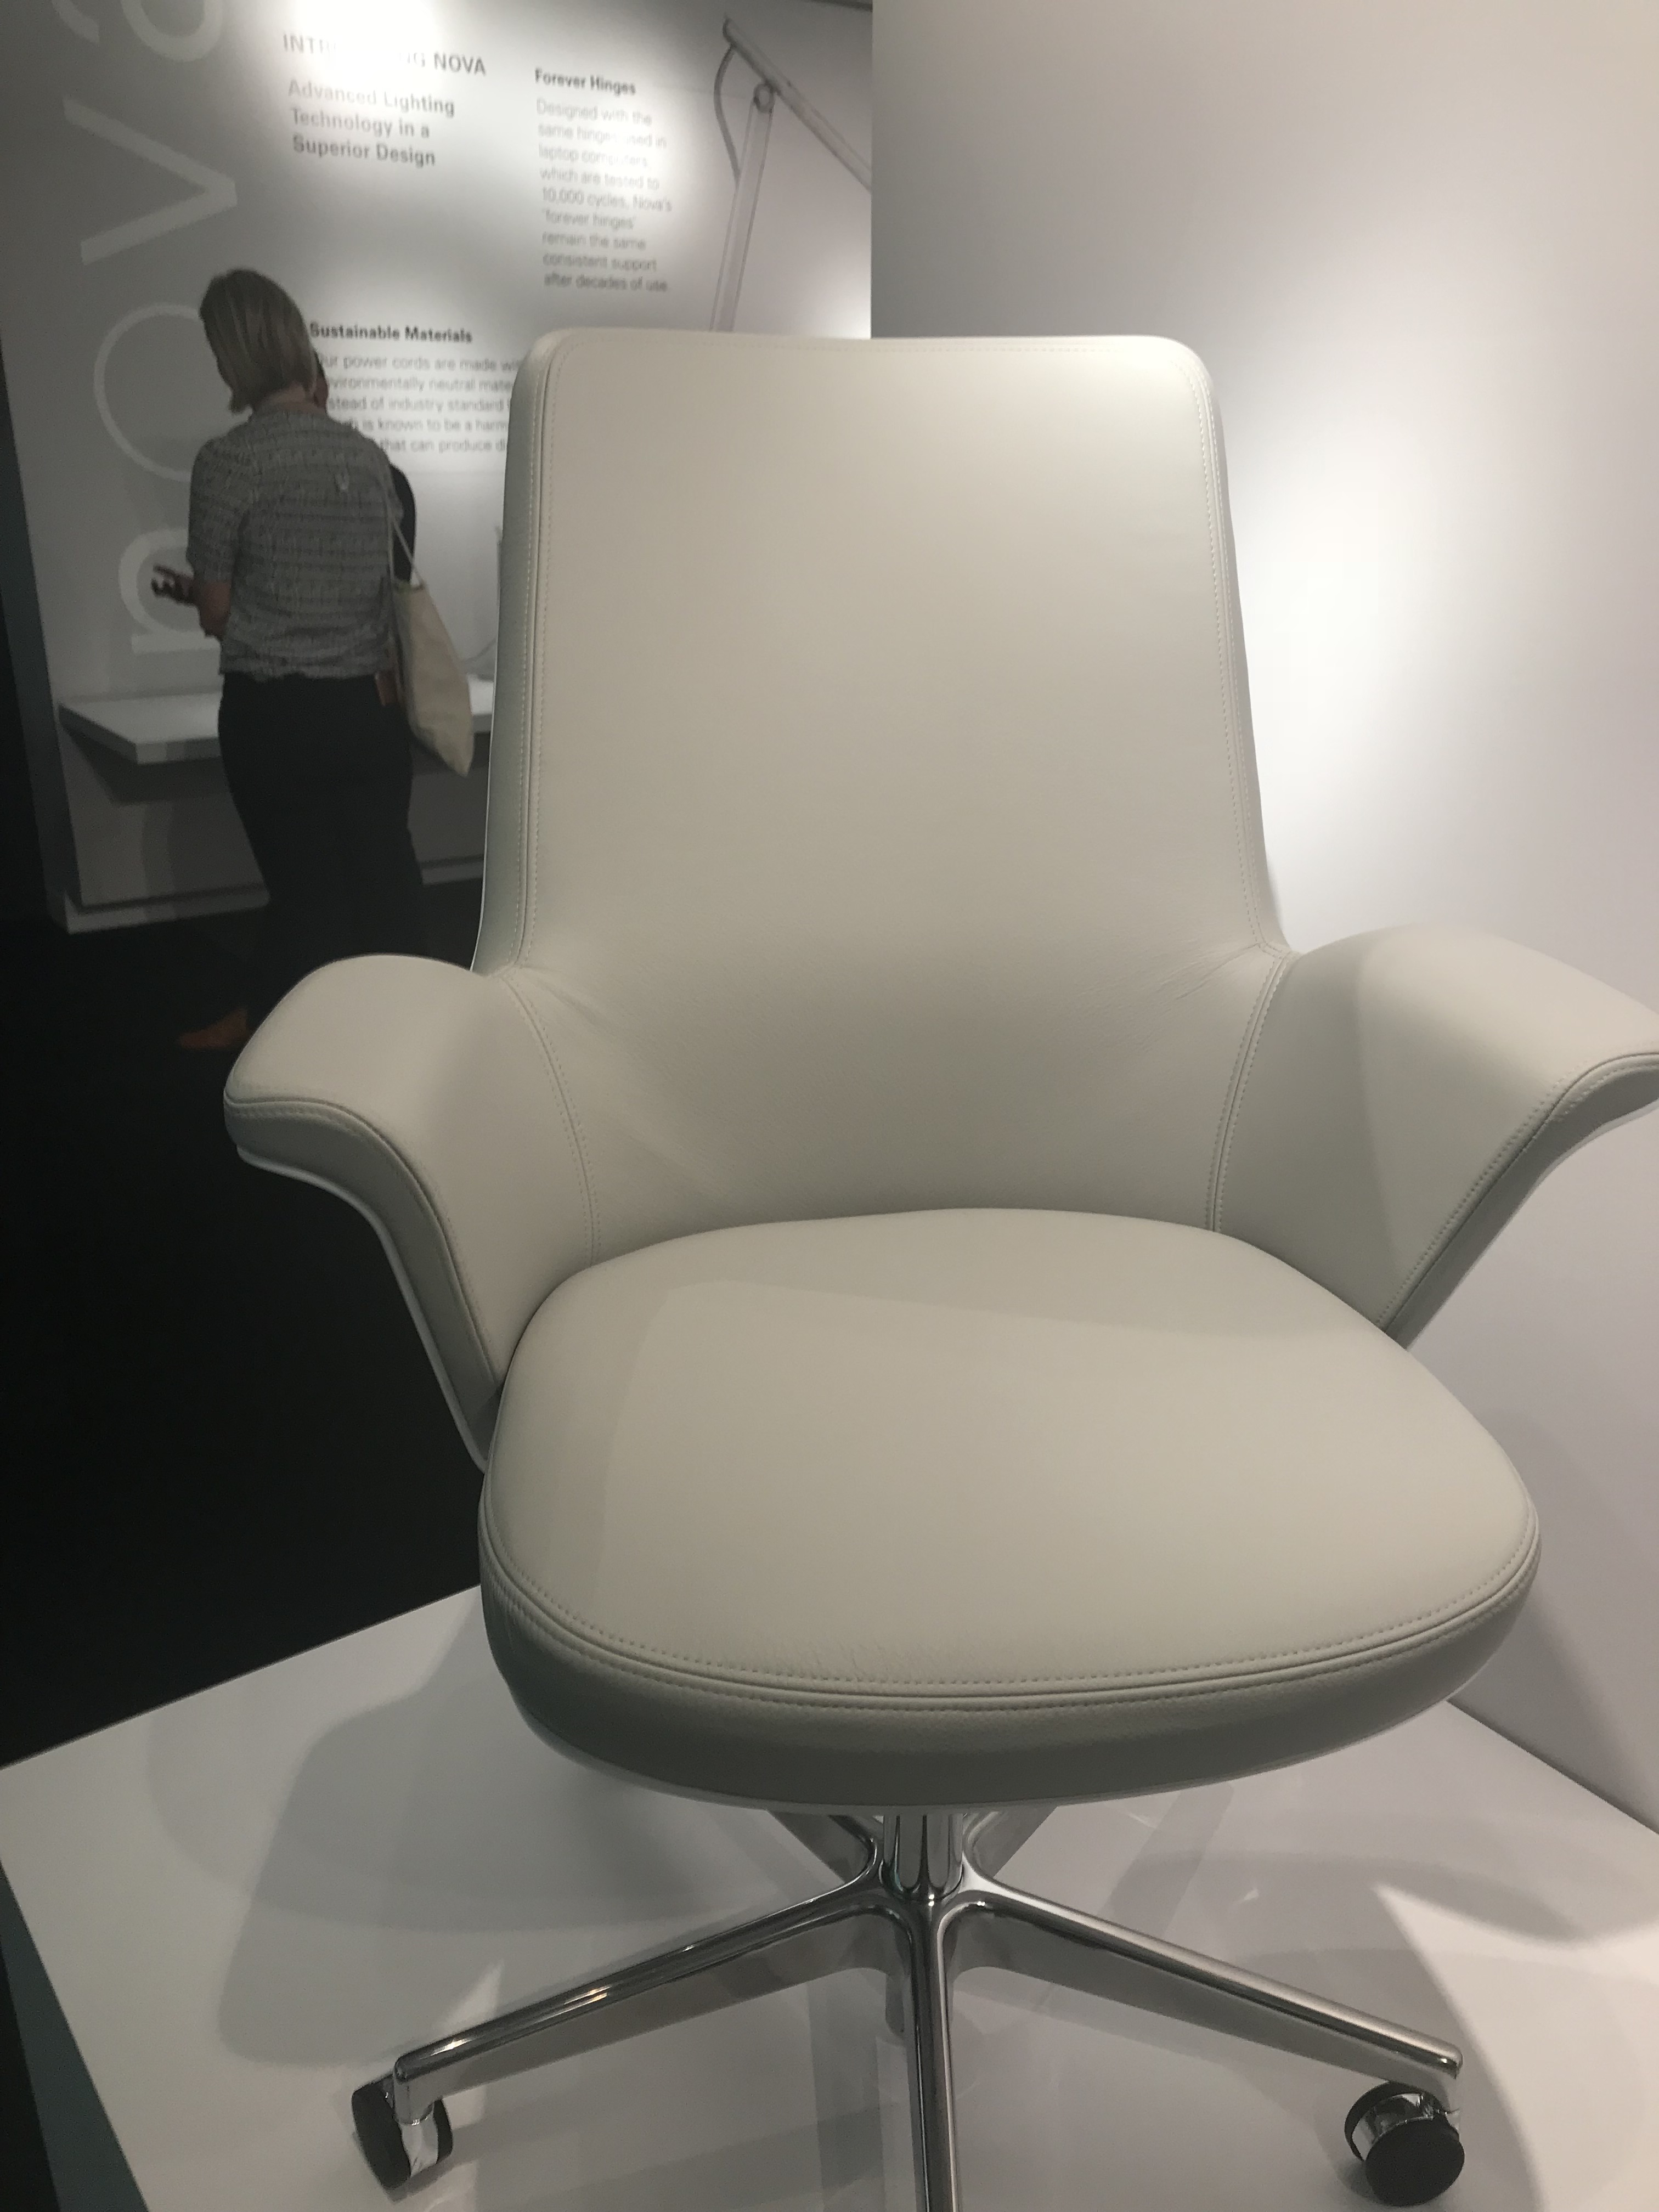 At NeoCon 2018: Award-Winning Debuts from Humanscale